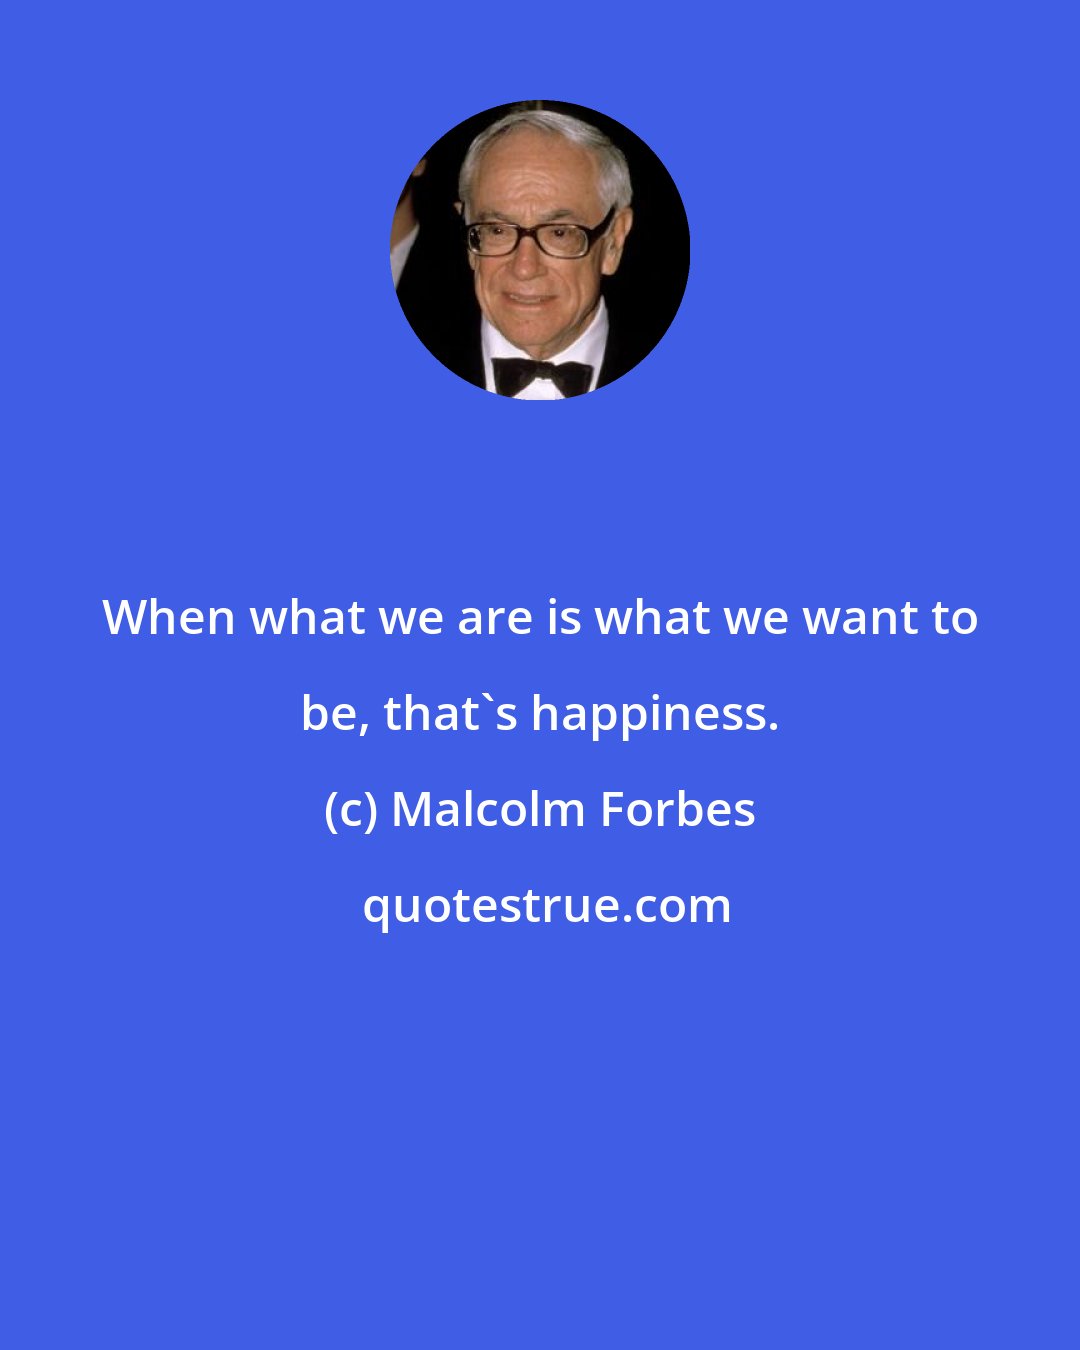 Malcolm Forbes: When what we are is what we want to be, that's happiness.